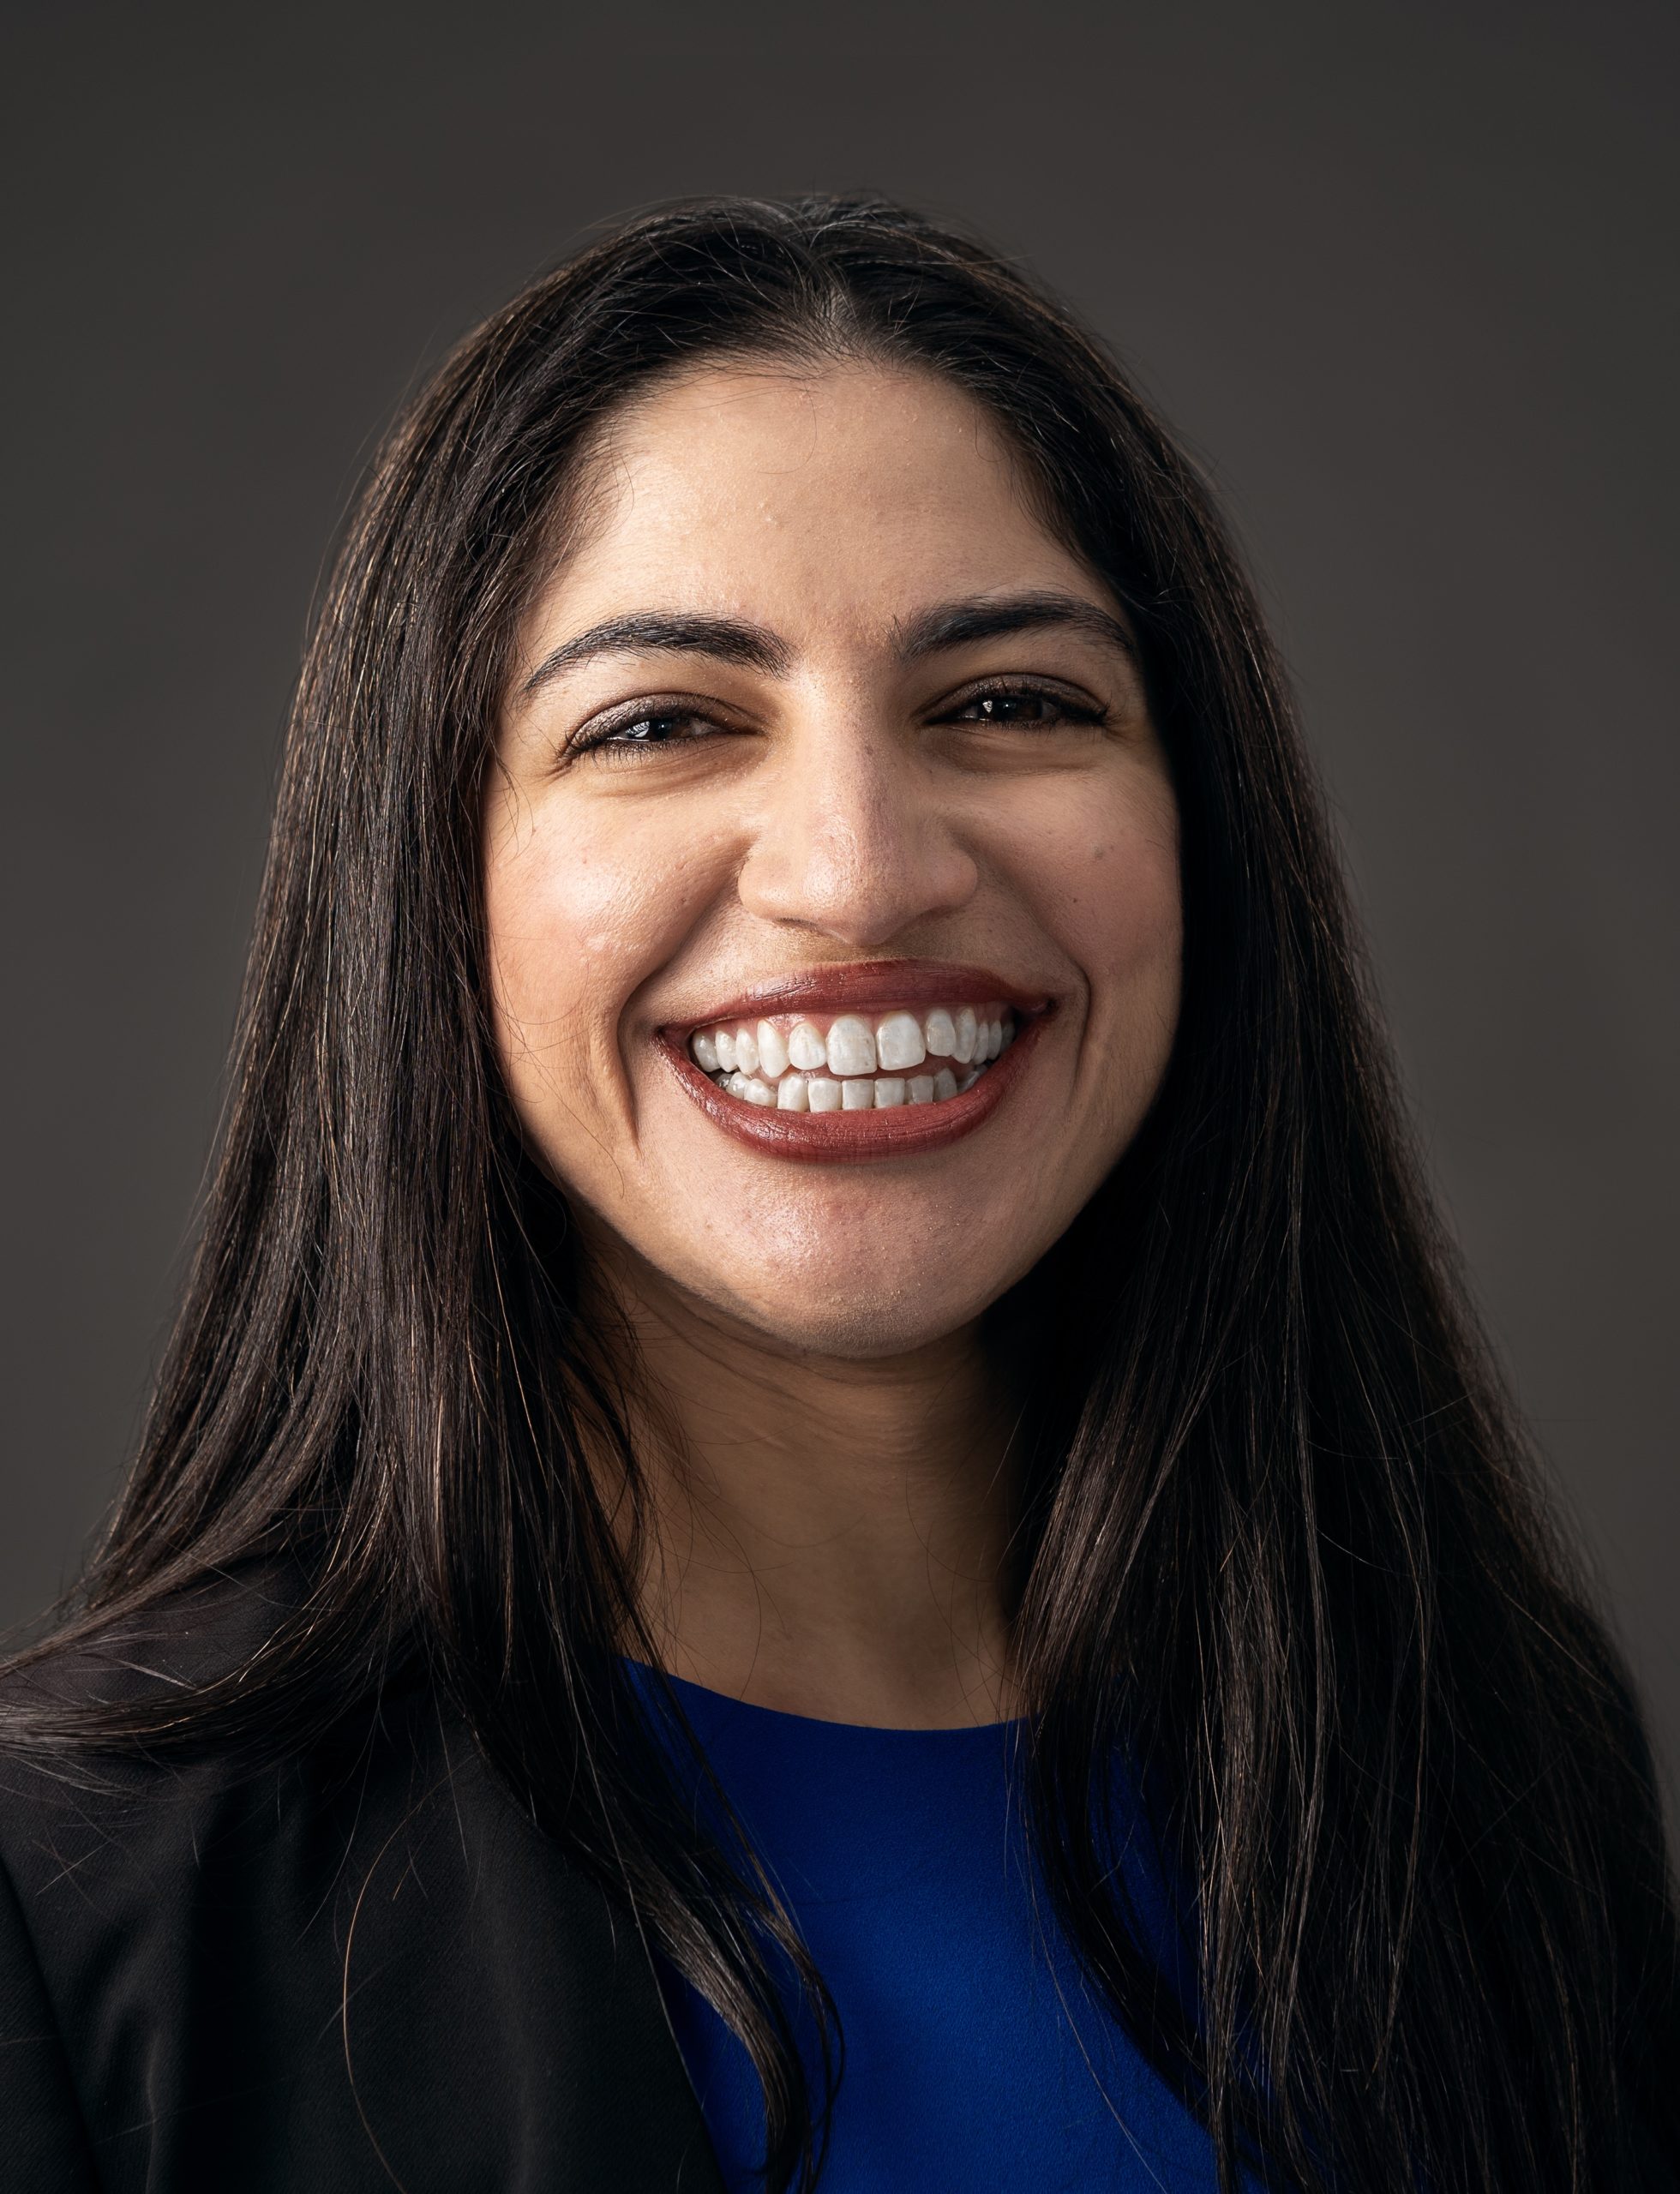 Headshot of Jeanine R. Soufan, Attorney at the Law Offices of James Scott Farrin